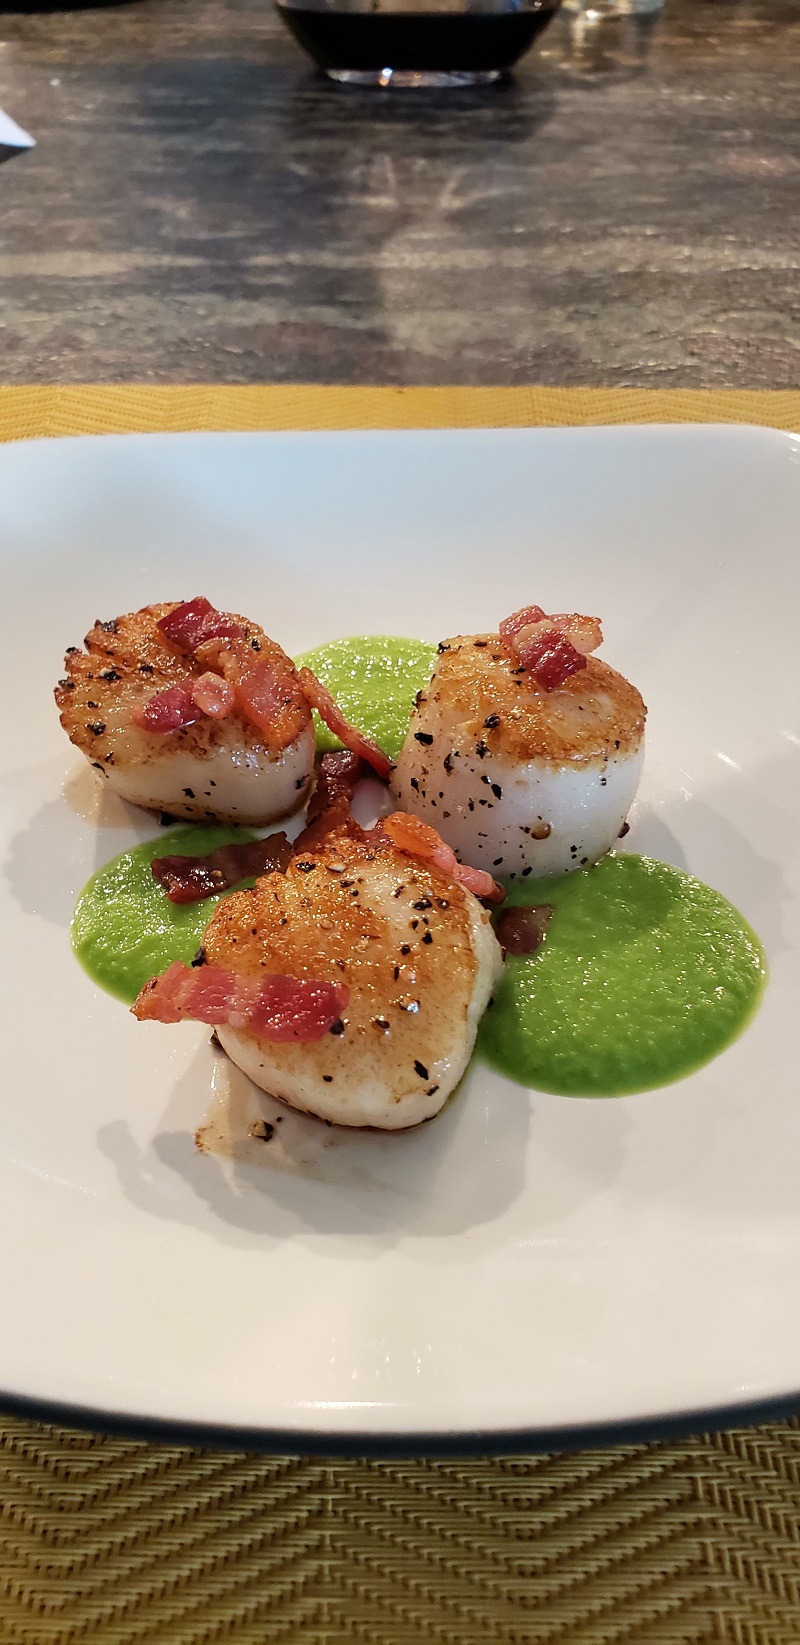 My 18yo Son Just Made Me Seared Scallops With A Pea Puree And Caramelized Bacon For My 49th Birthday. 1st Course!